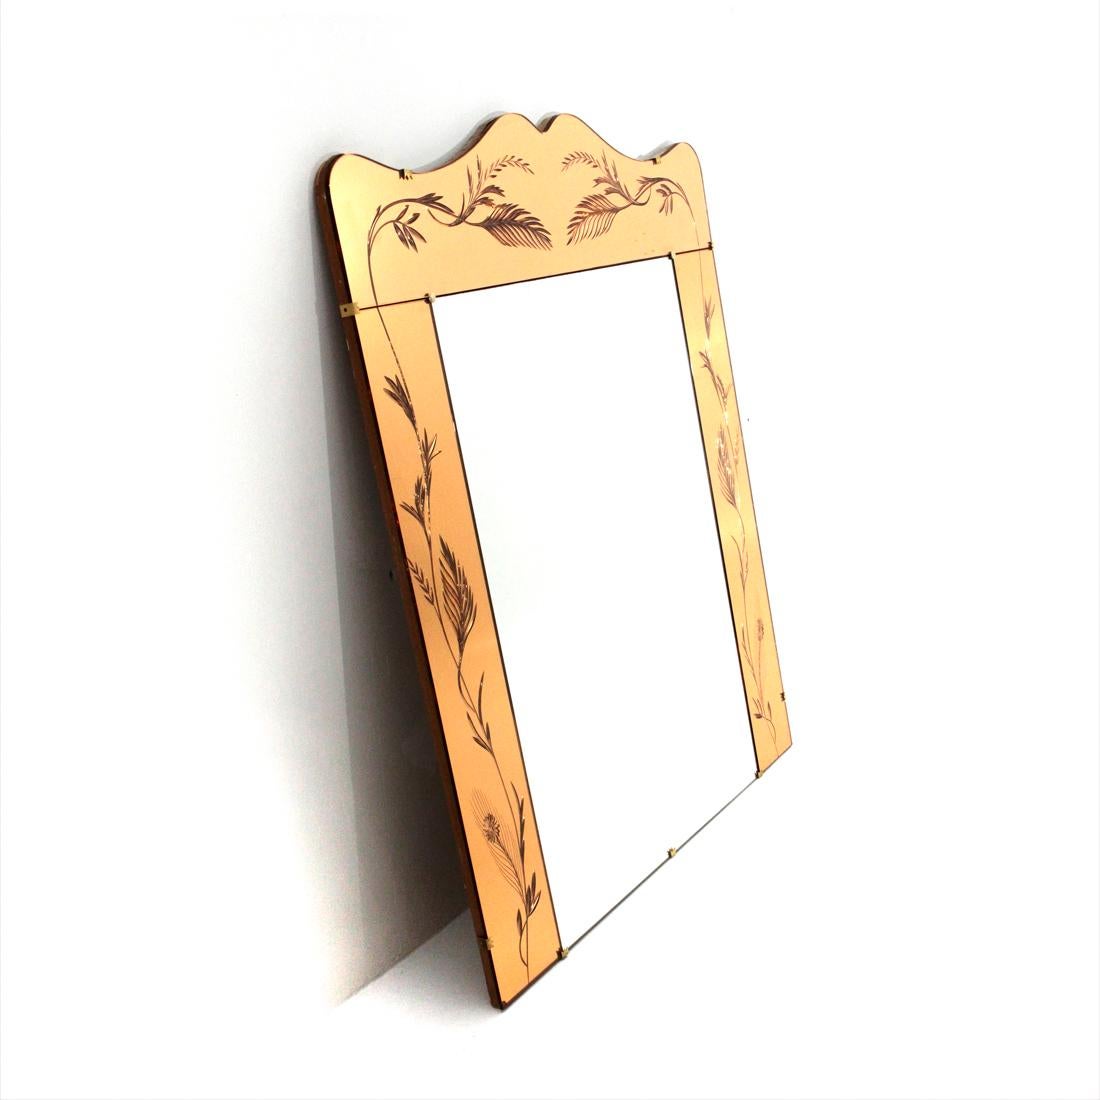 Mirror produced in the 1950s by Cristal Art.
Wooden structure.
Side mirrors in salmon-colored glass with decorations.
Central mirror in mirrored glass.
Blocks in golden aluminum and brass.
Good general conditions, some signs due to normal use